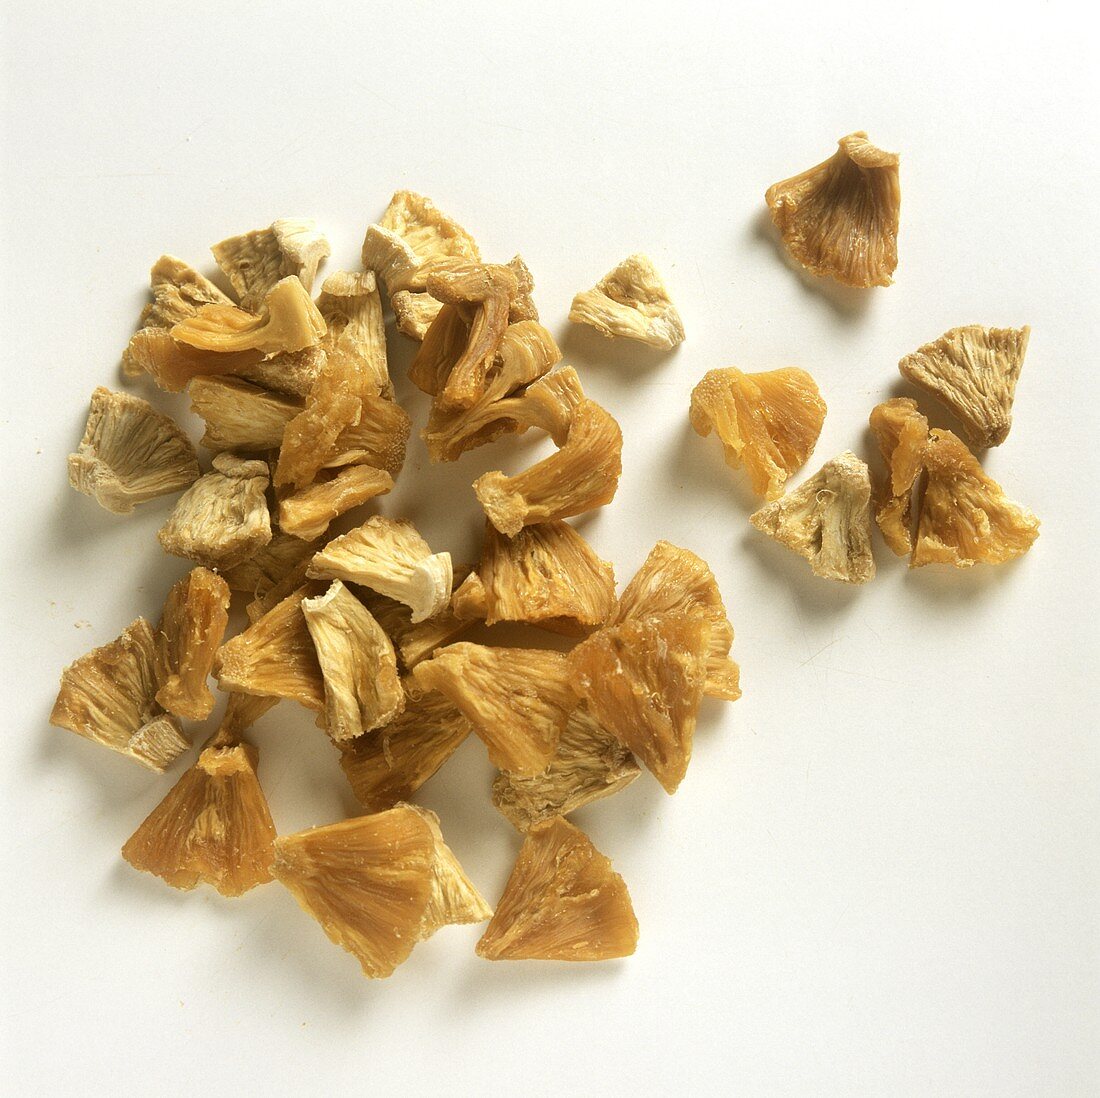 Dried Pineapple Pieces